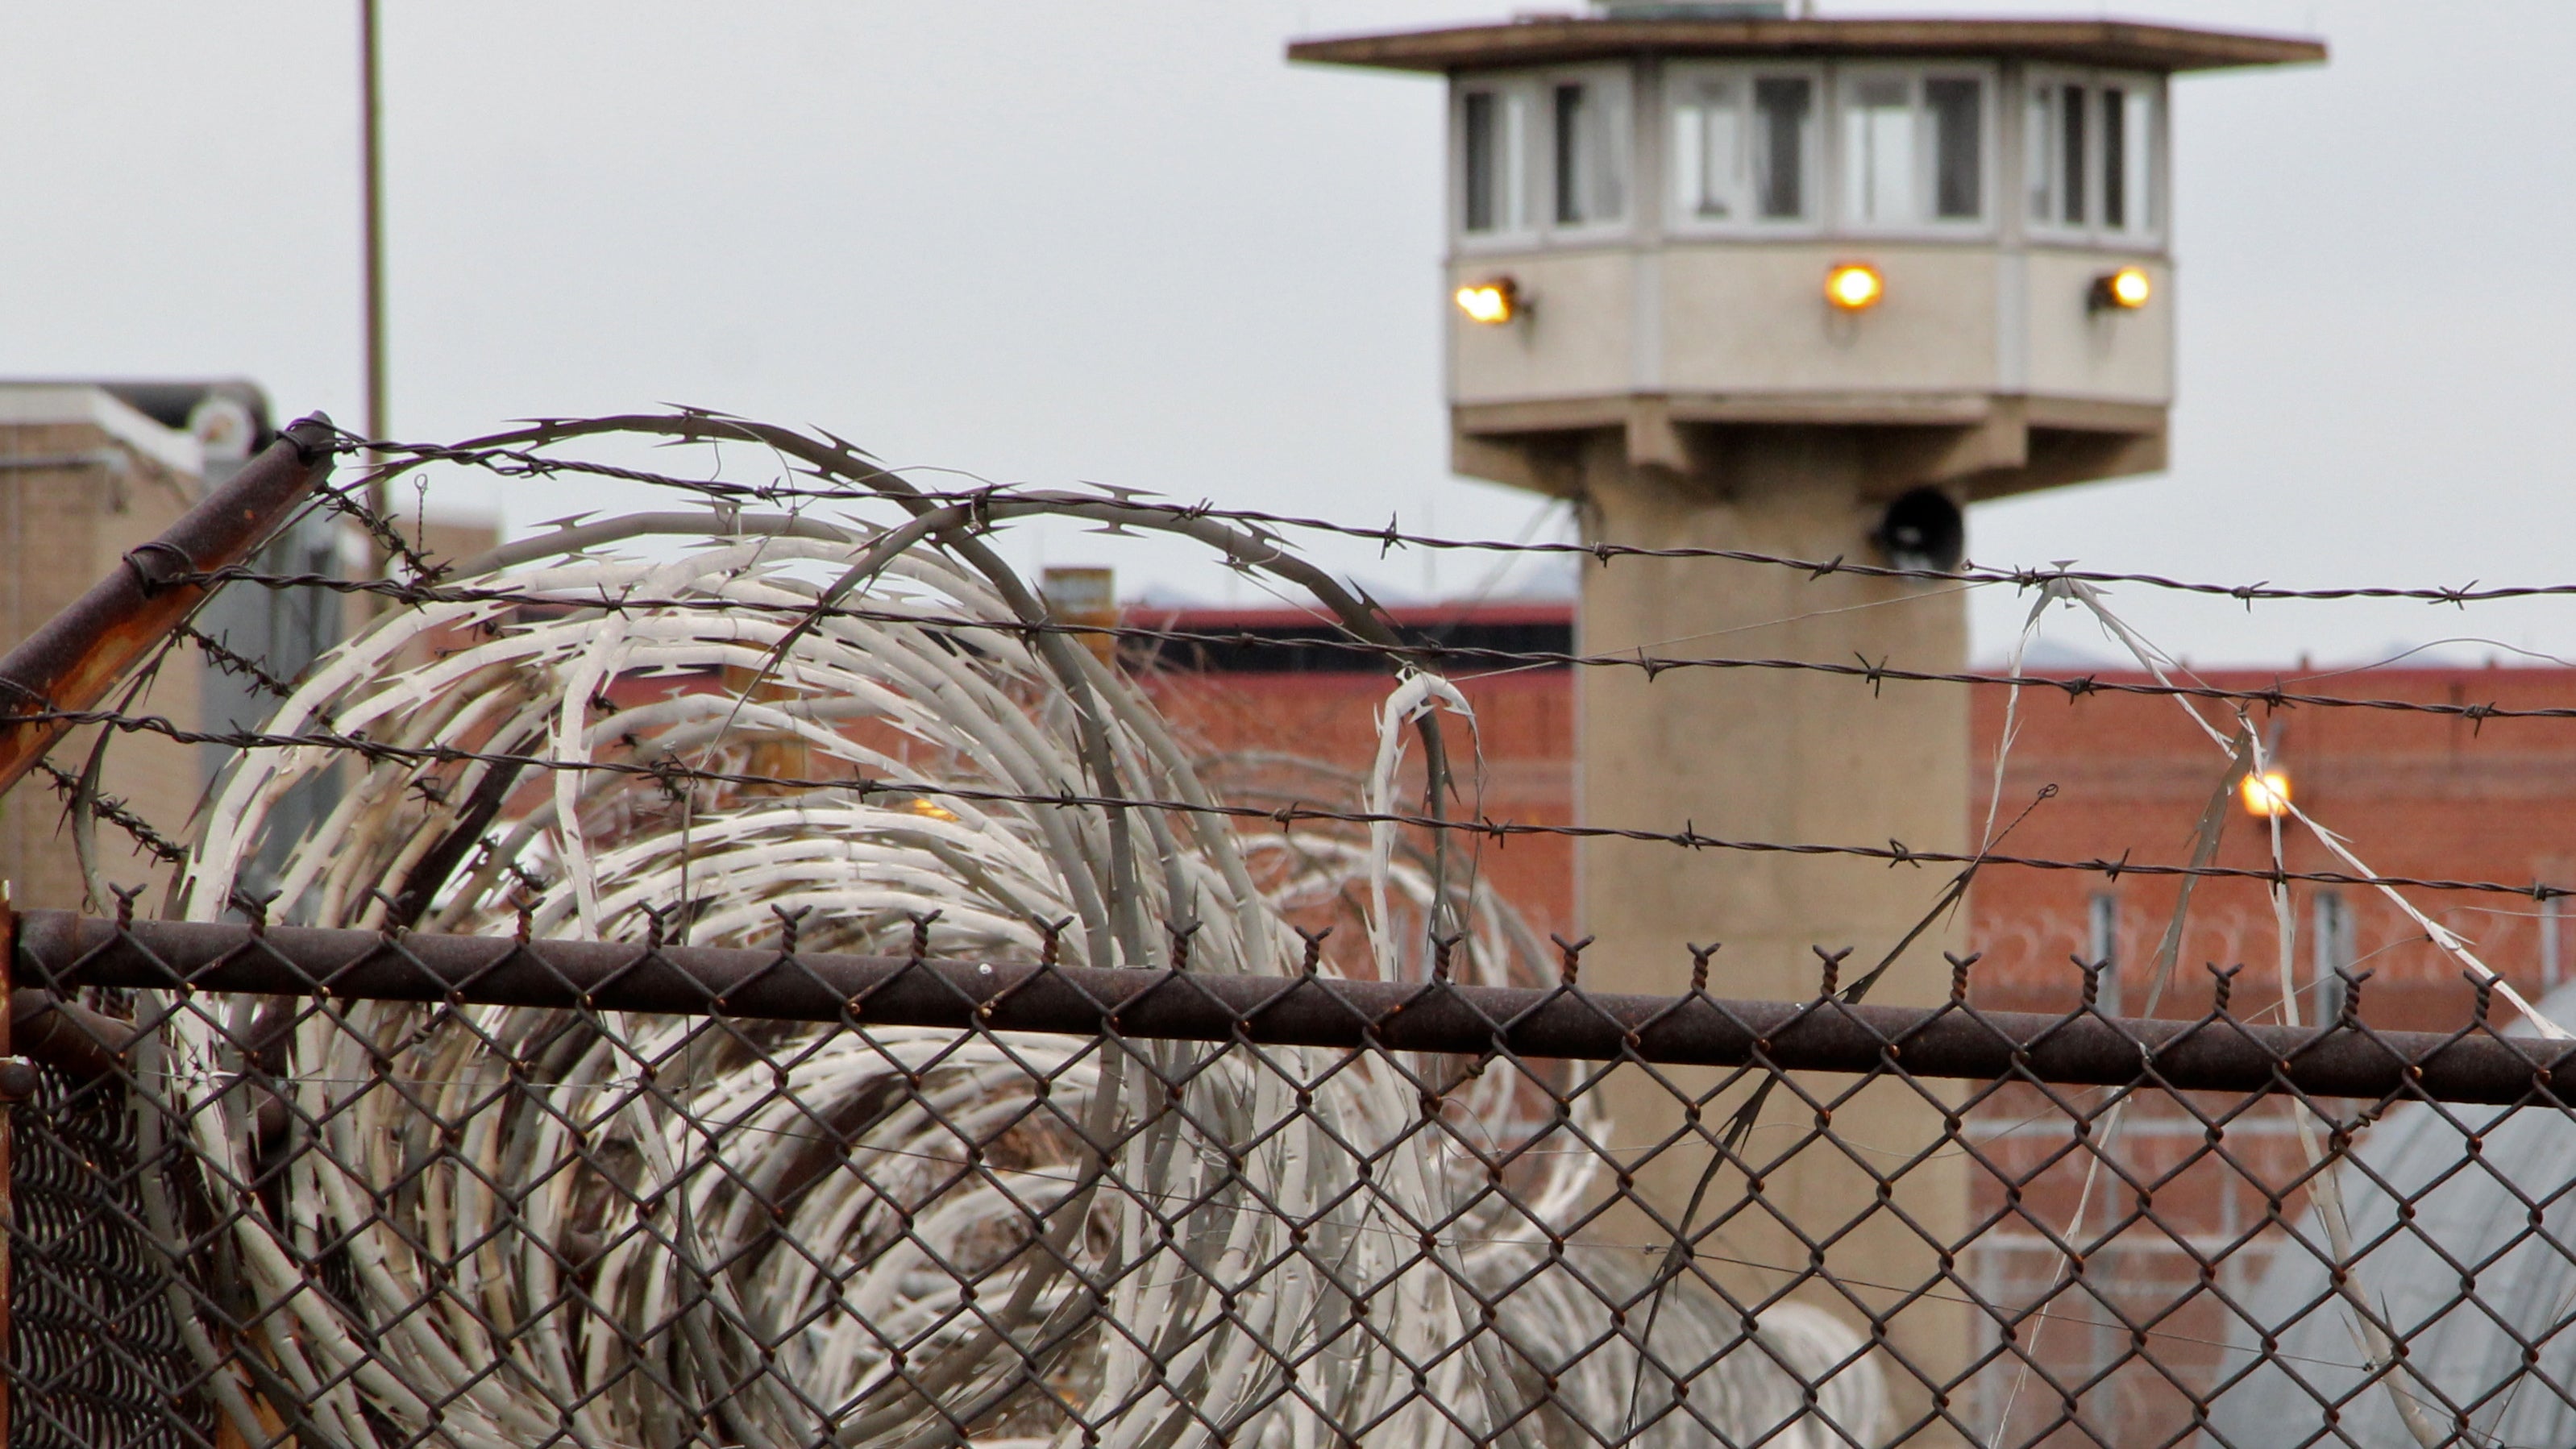 The correctional complex on State Road in Philadelphia. (Emma Lee/WHYY)